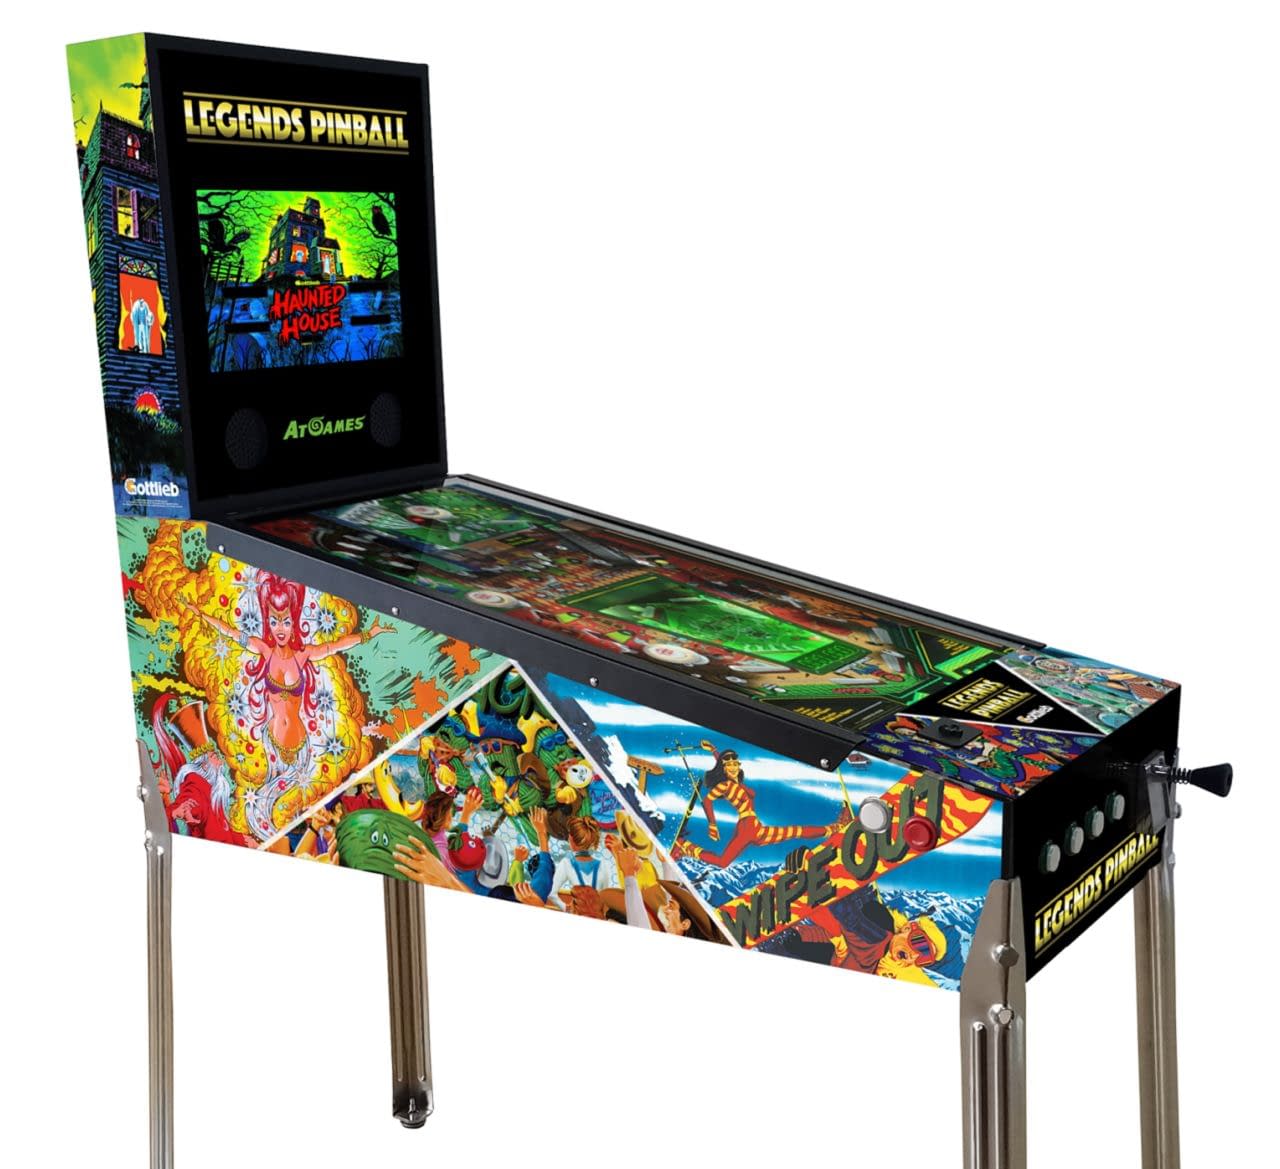 AtGames To Feature Zaccaria Pinball Tables In Legends Arcade